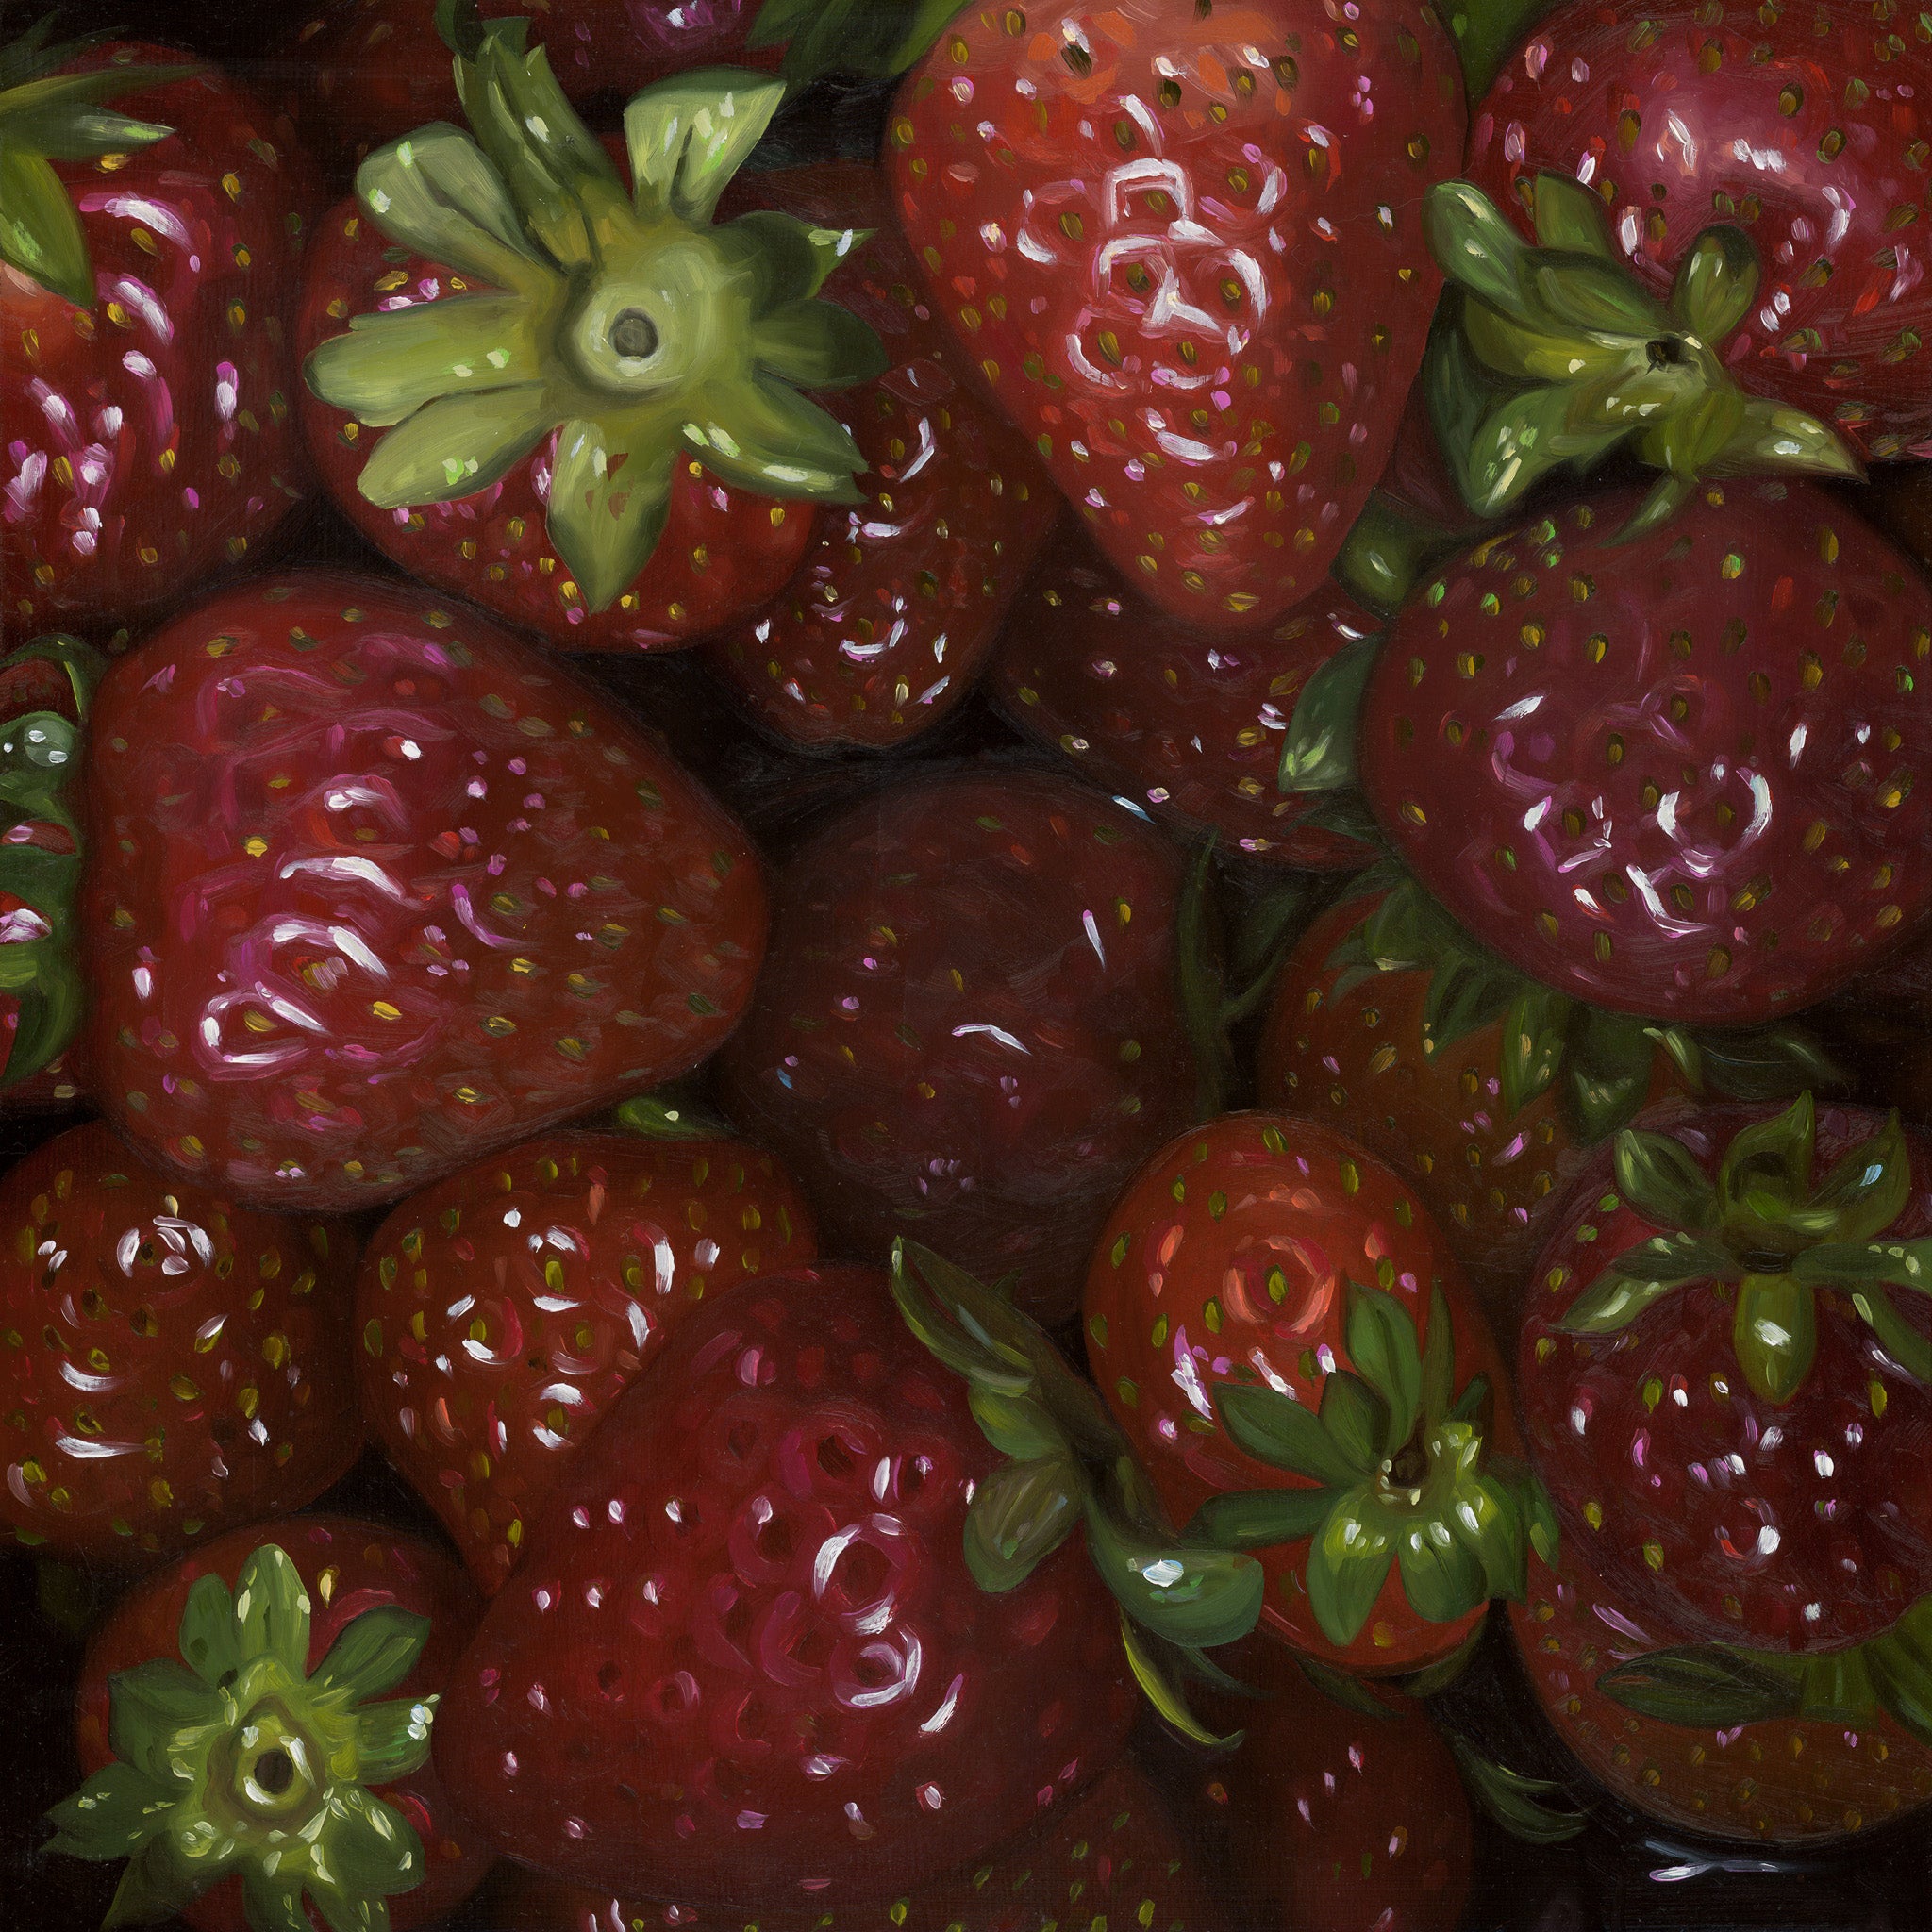 Strawberry, Three Great Strawberries Collection - Burpee